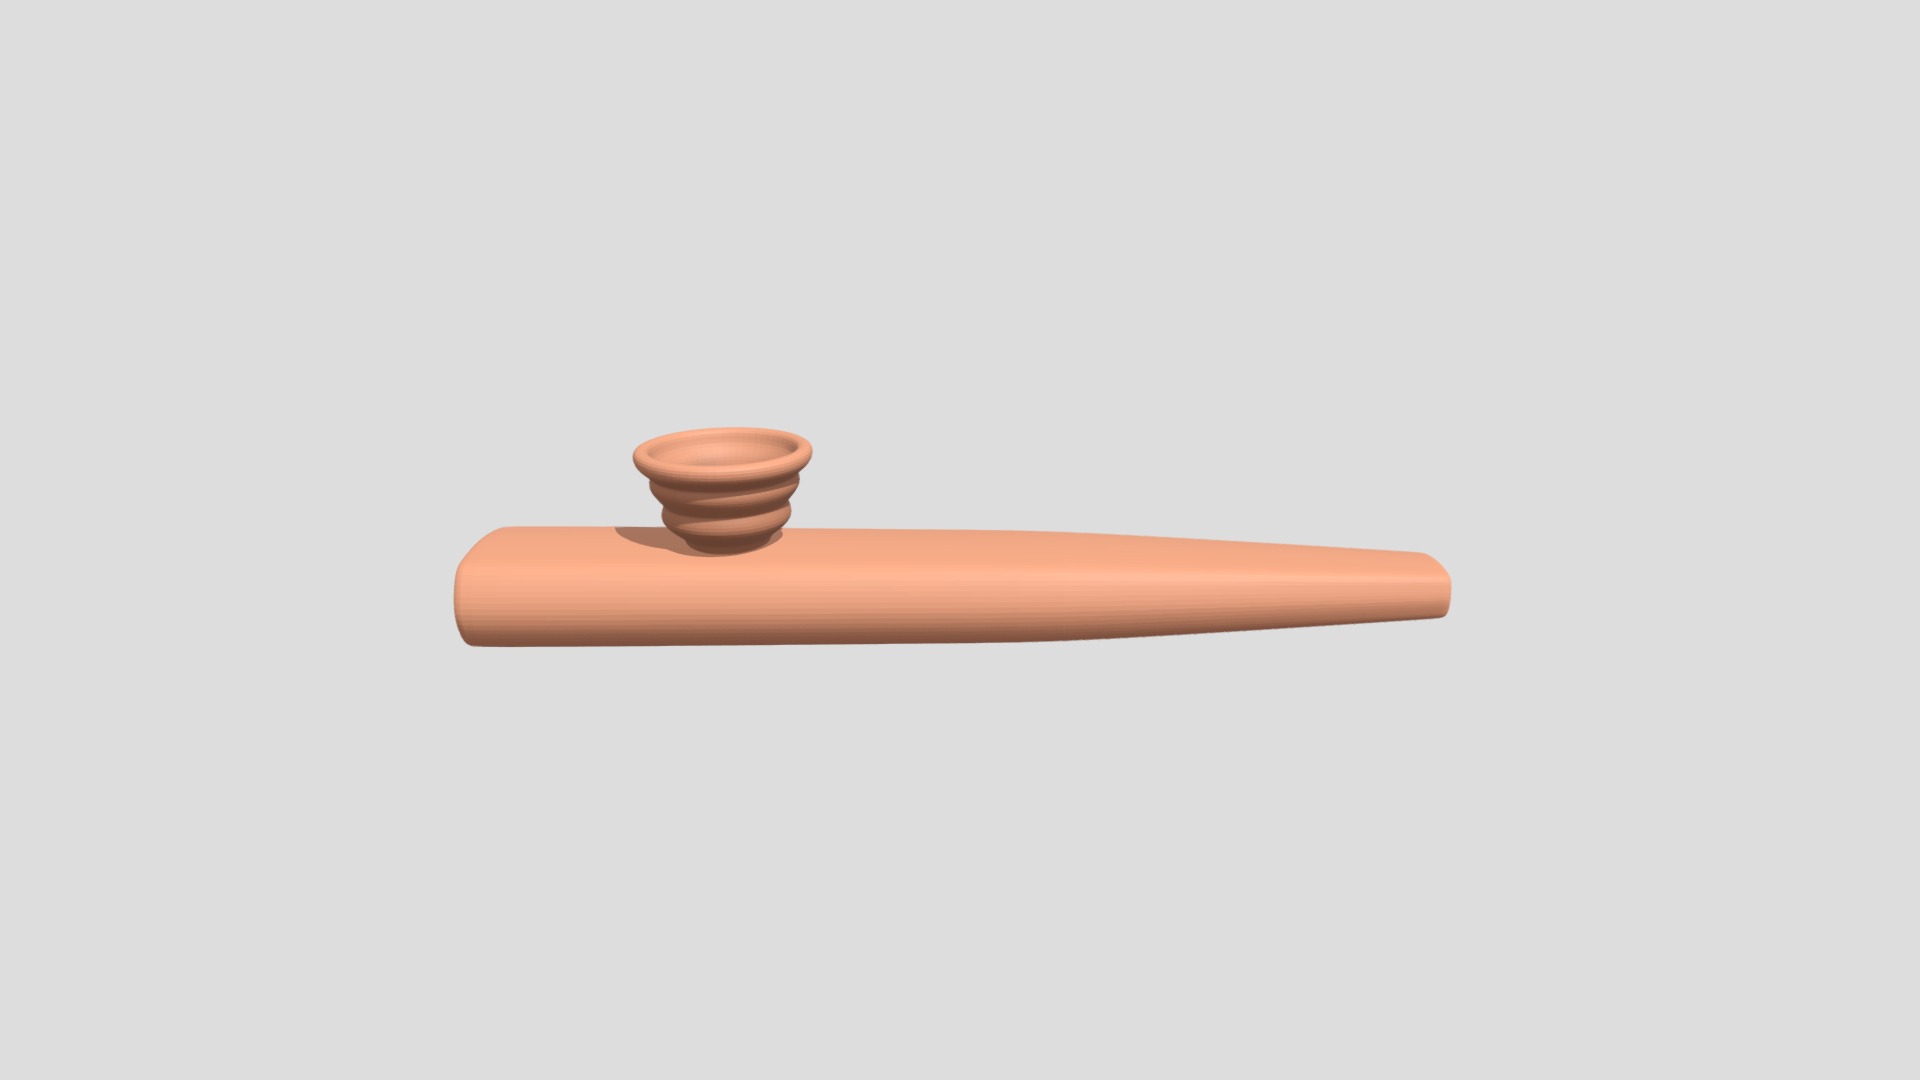 3D model Kazoo - This is a 3D model of the Kazoo. The 3D model is about a wooden spoon with a handle.